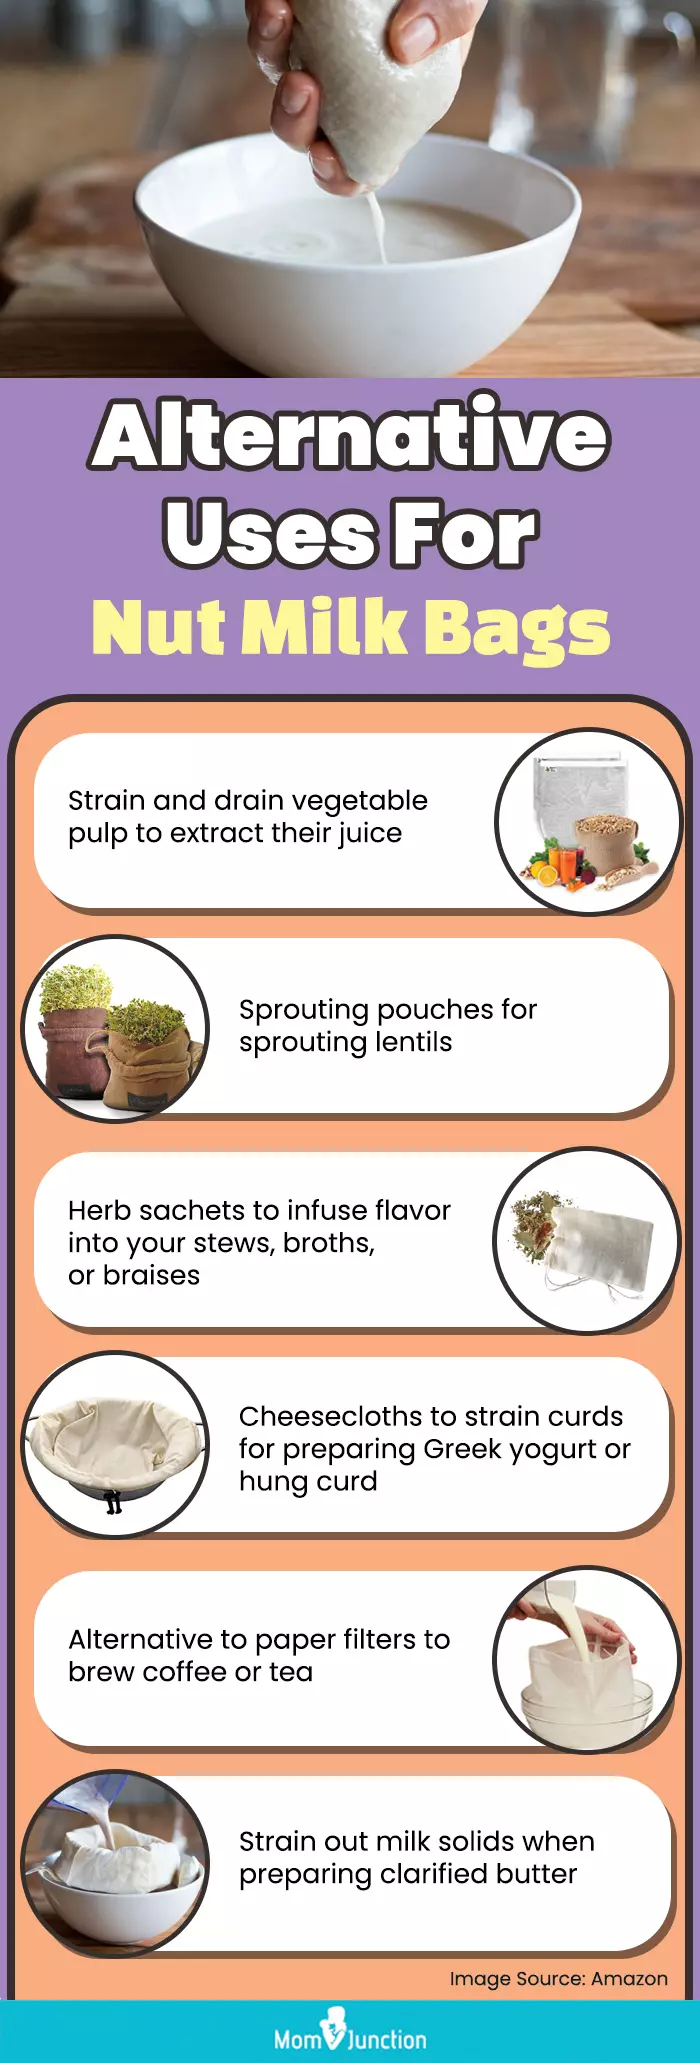 Alternative Uses For Nut Milk Bags (infographic)